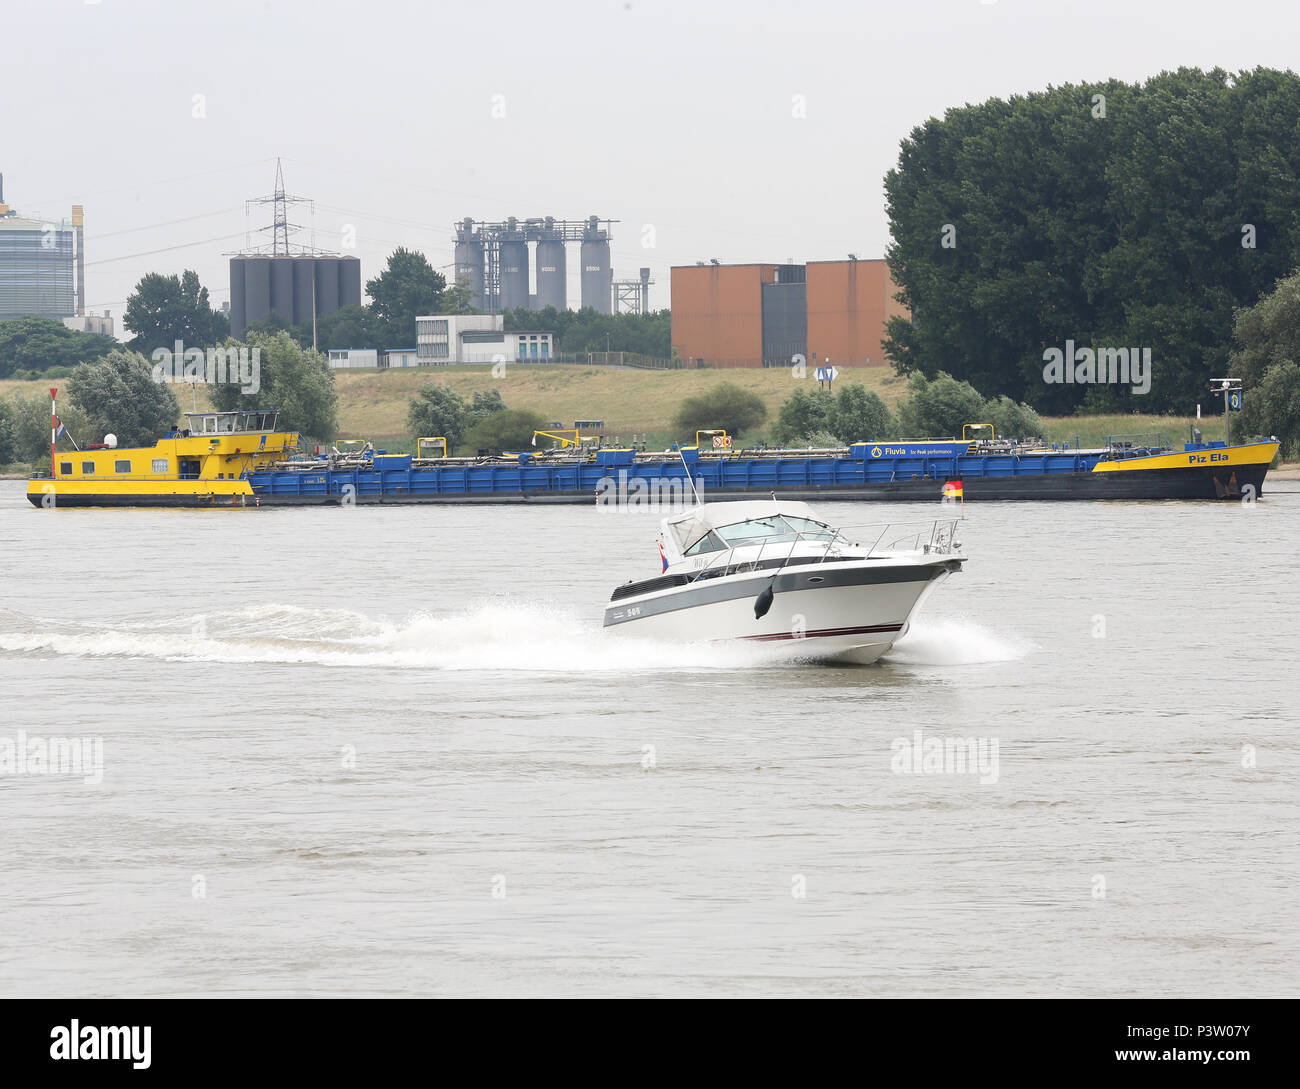 Duisburg, Germany. 19th June, 2018. A cruiser passes the leaking caustic soda tanker 'Piz Ela' (back) on the Rhine at Duisburg. A second tanker is supposed to take over the load so the stranded vessel becomes lighter and might get out. Credit: Roland Weihrauch/dpa/Alamy Live News Stock Photo